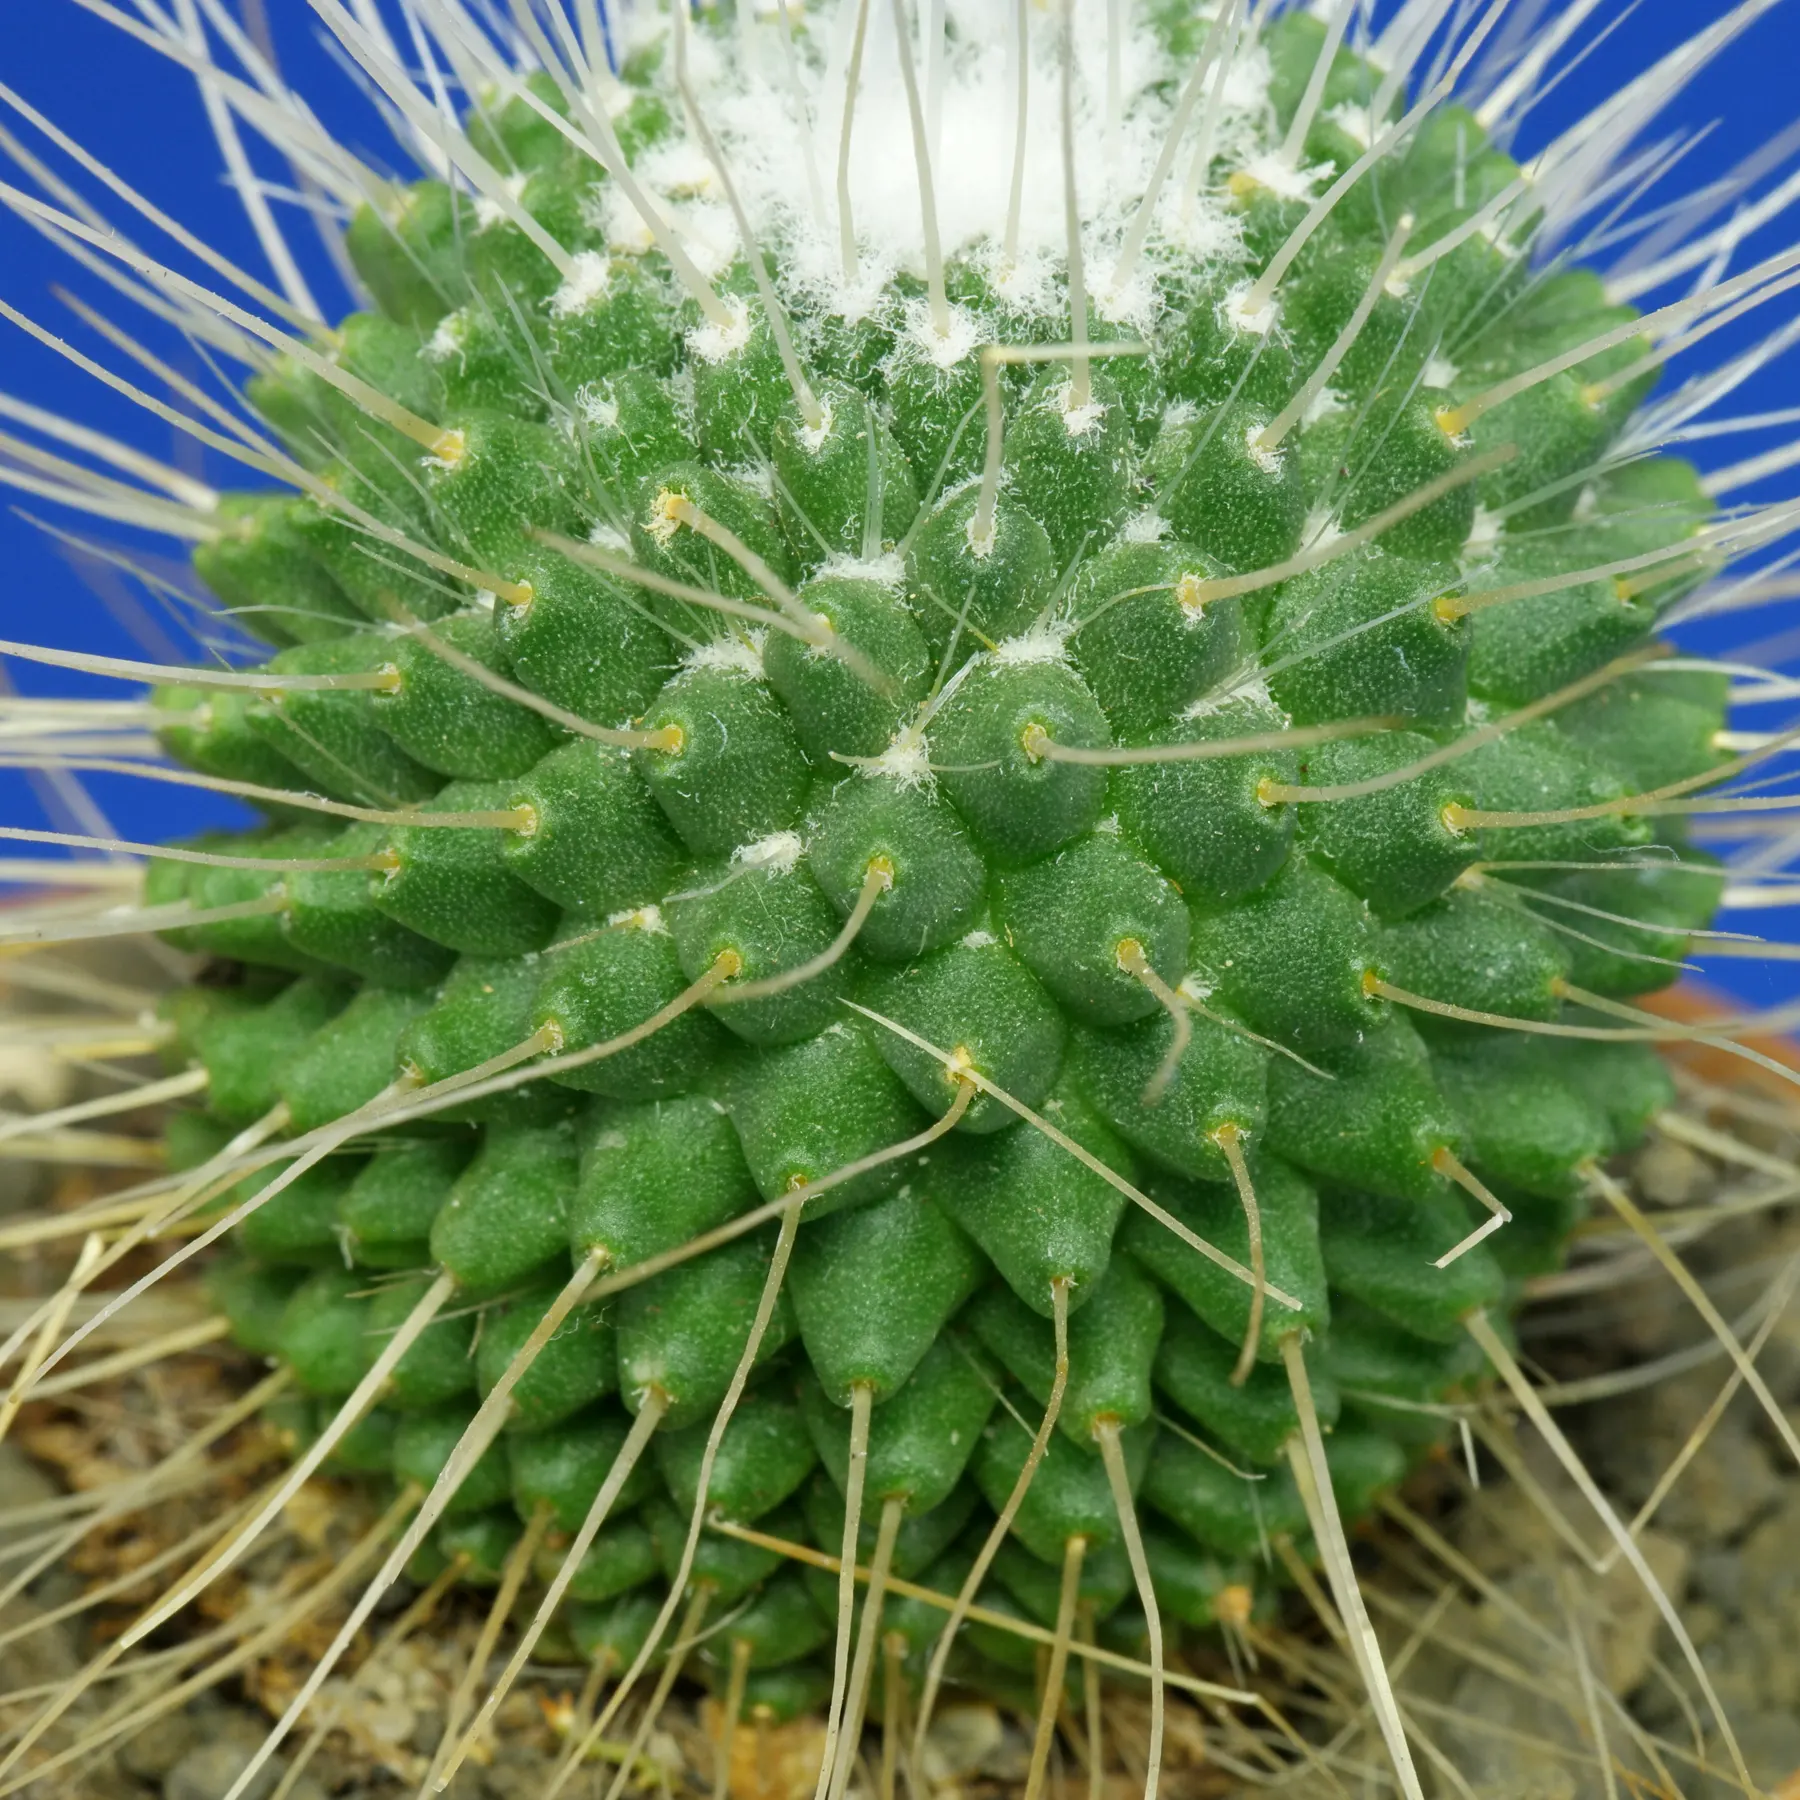 Spiny Pincushion Cactus areol